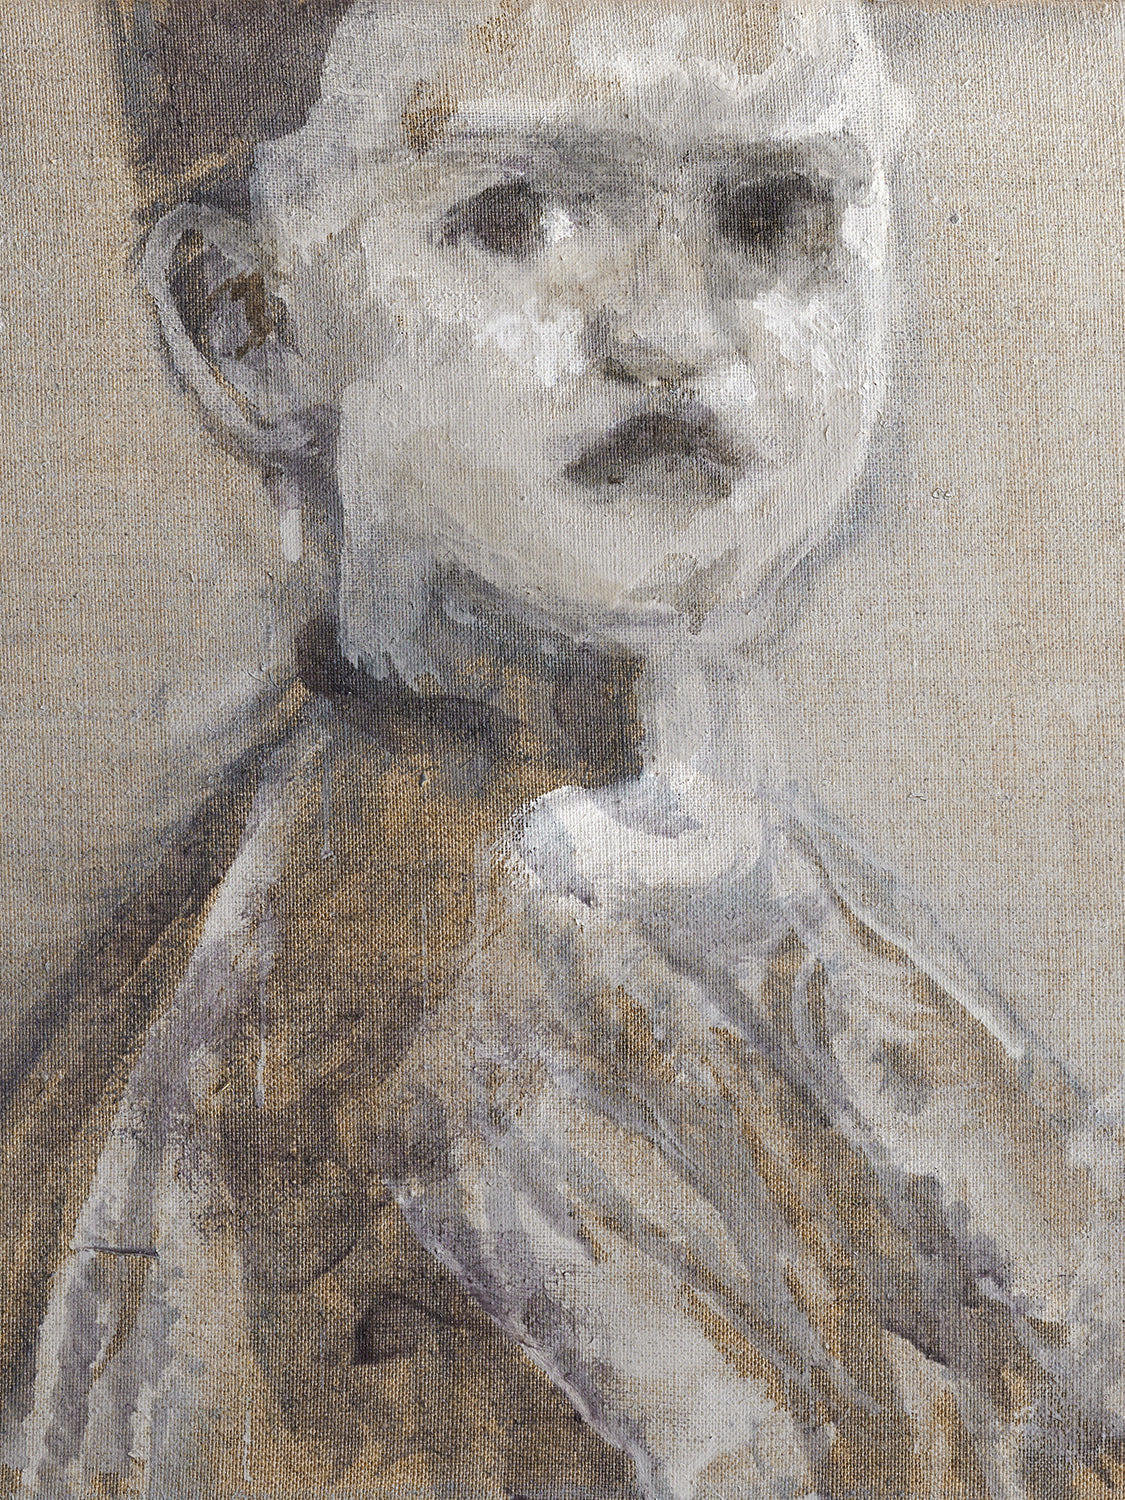 Untitled (Self at the age of three)